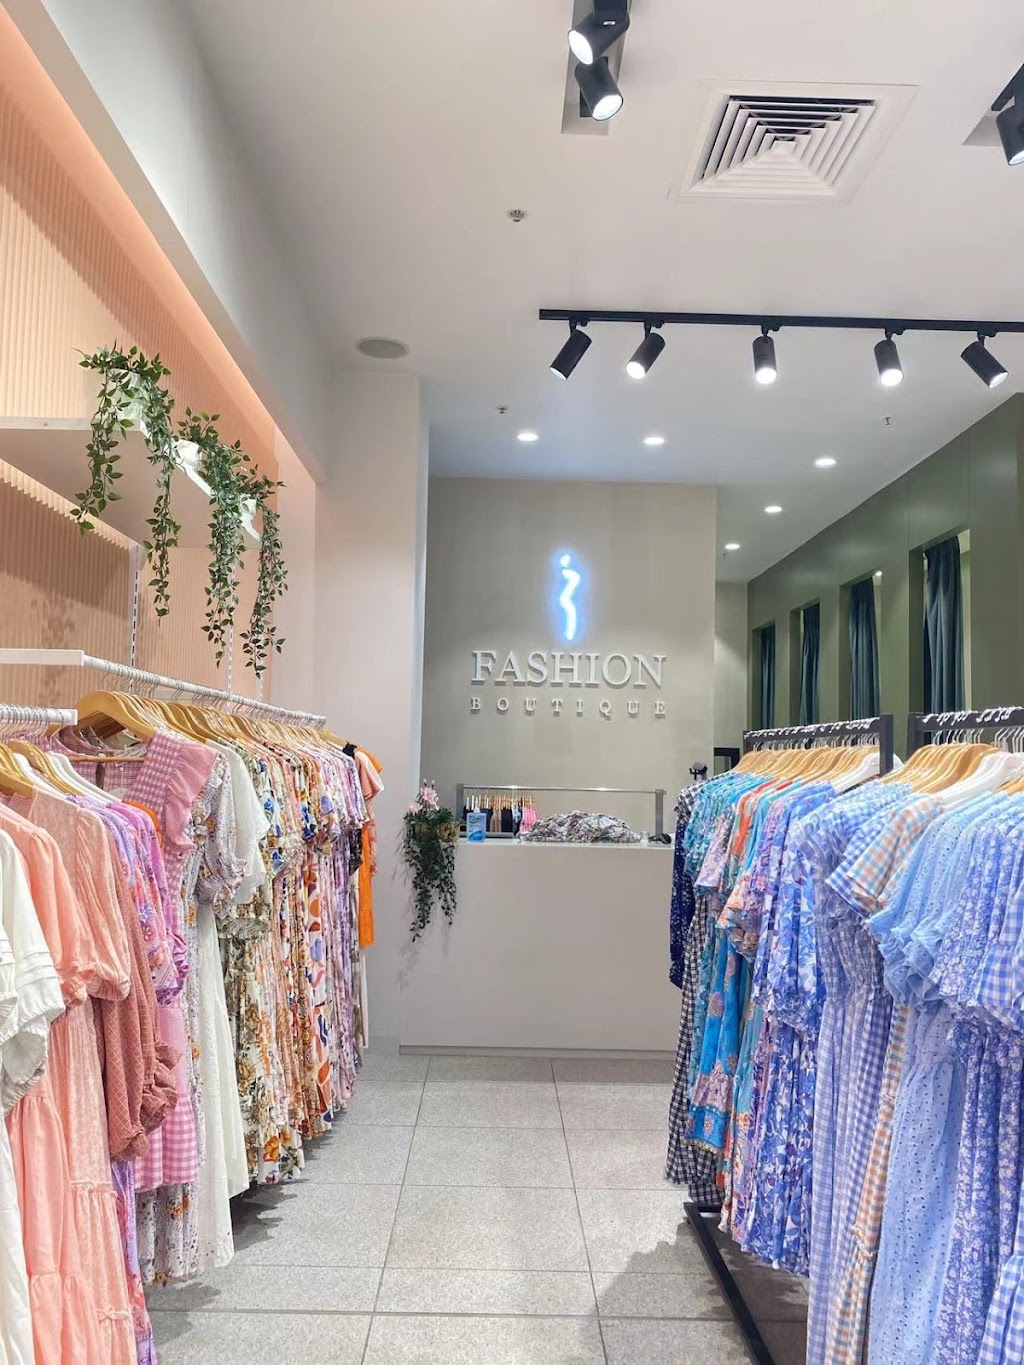 I Fashion - Strathpine | clothing store | 295 Gympie Rd Shop 84 Strathpine Shopping Centre, Strathpine QLD 4500, Australia | 0478902888 OR +61 478 902 888